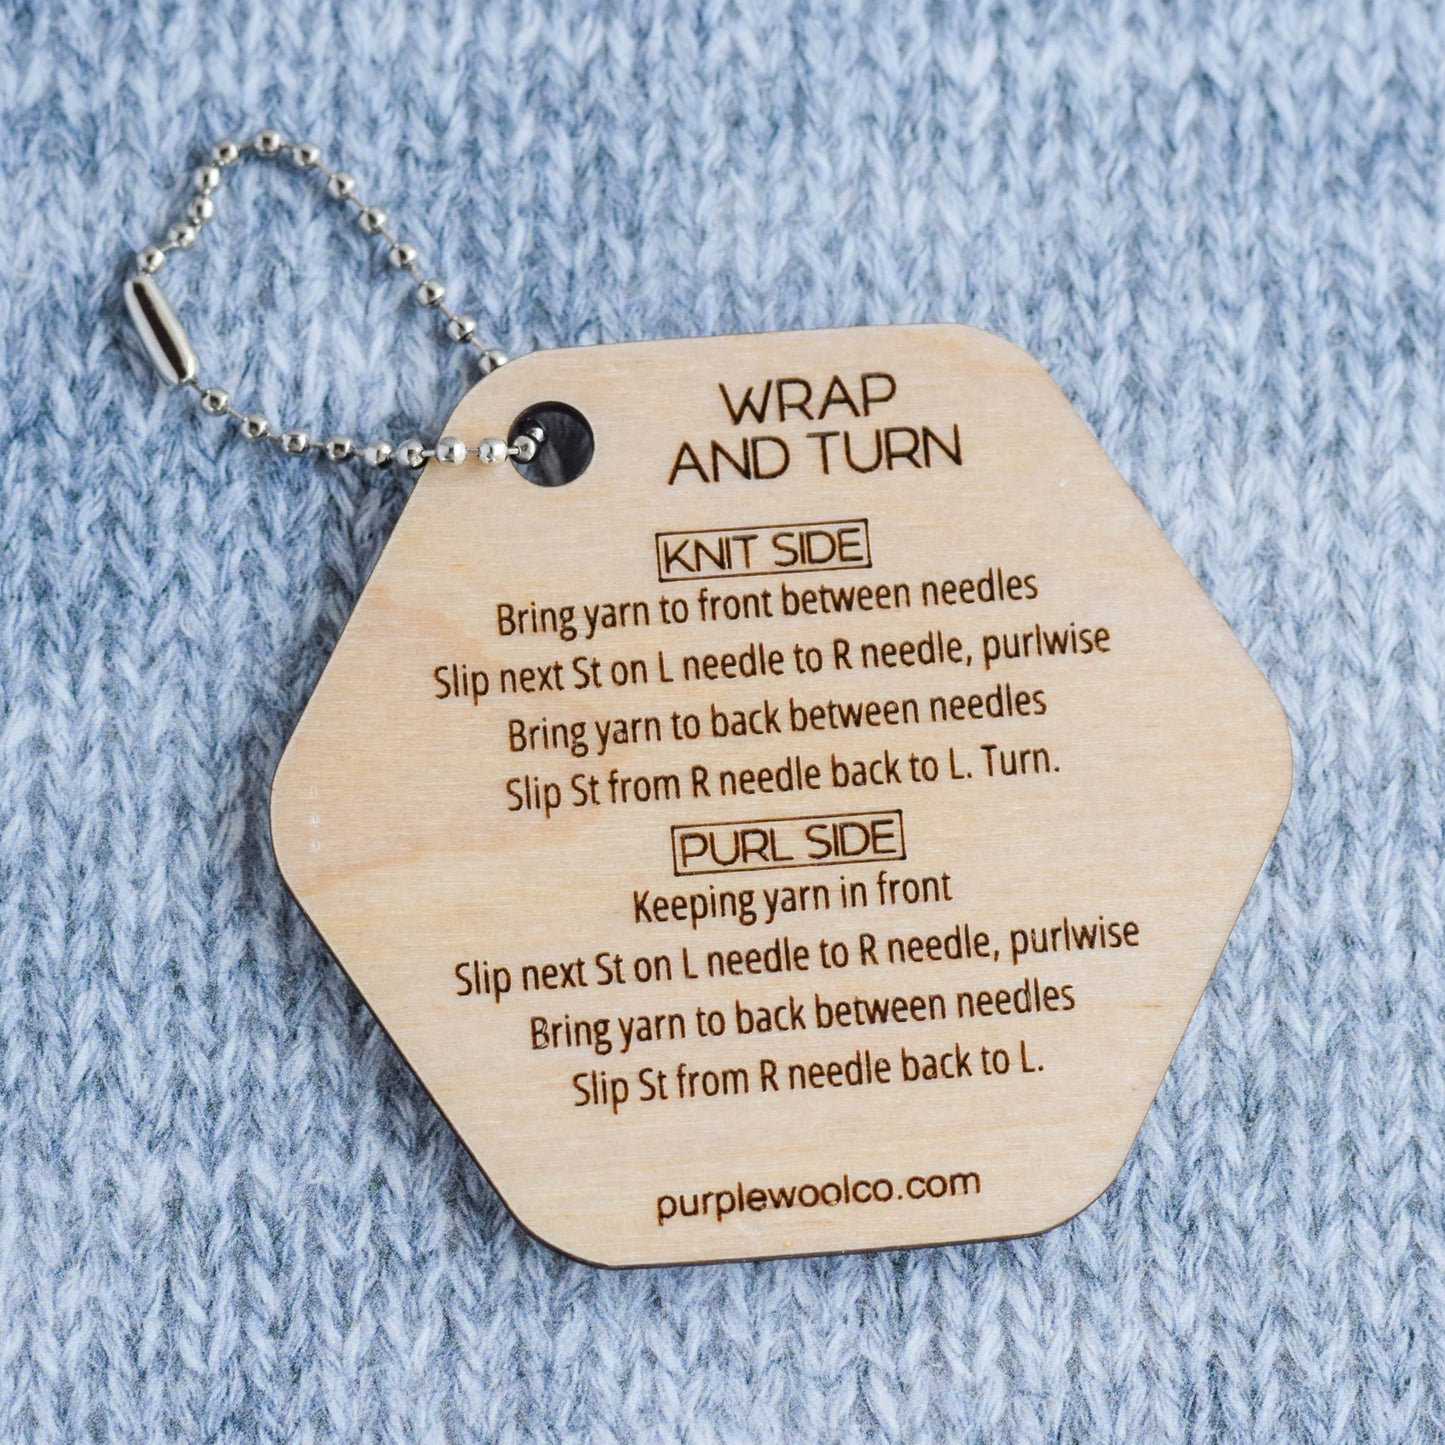 Wrap and Turn Help Instructions Tool